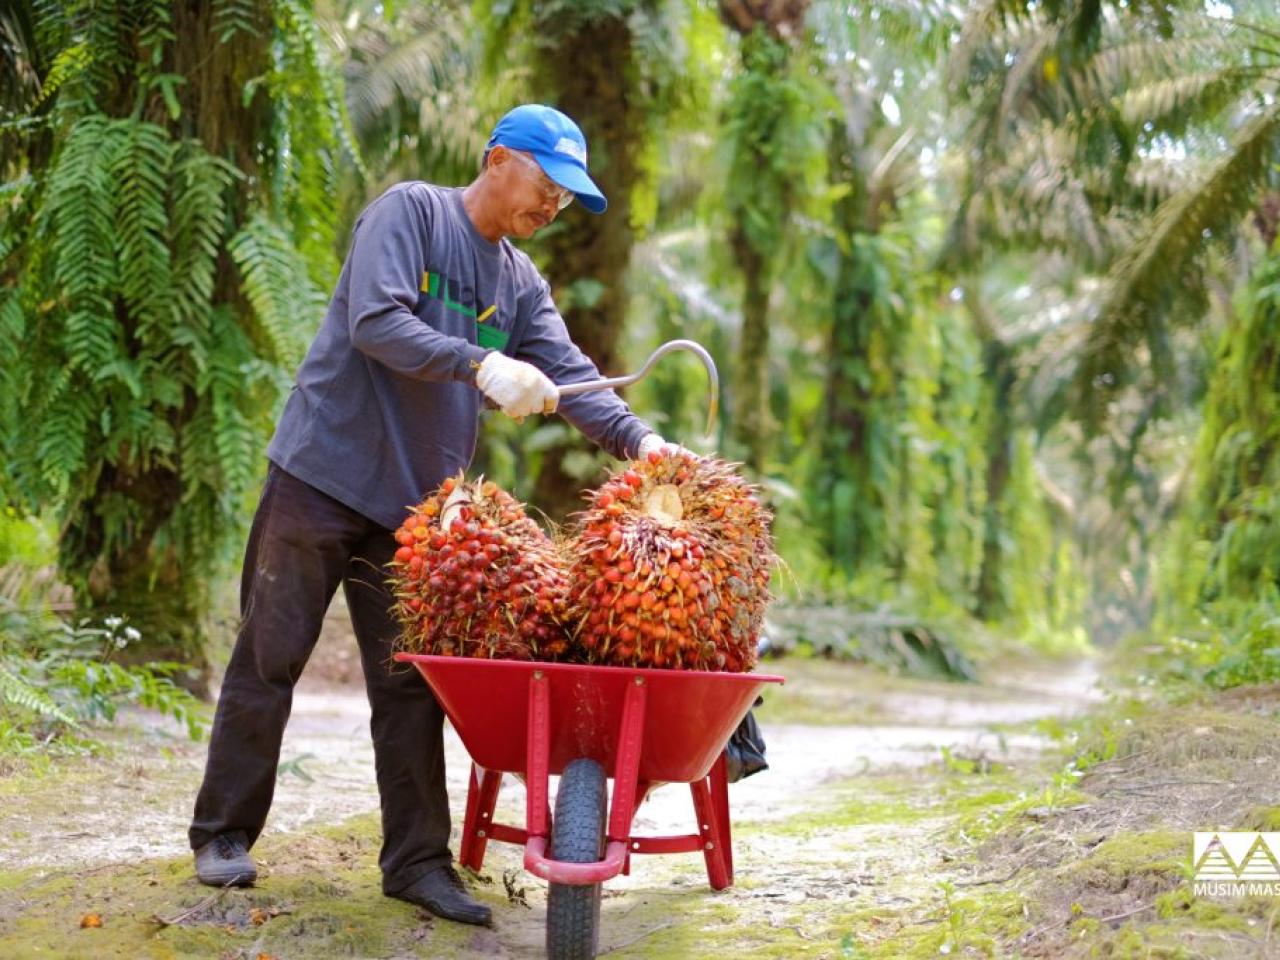 Oil palm smallholder farmer with fresh fruit bunch in Indonesia